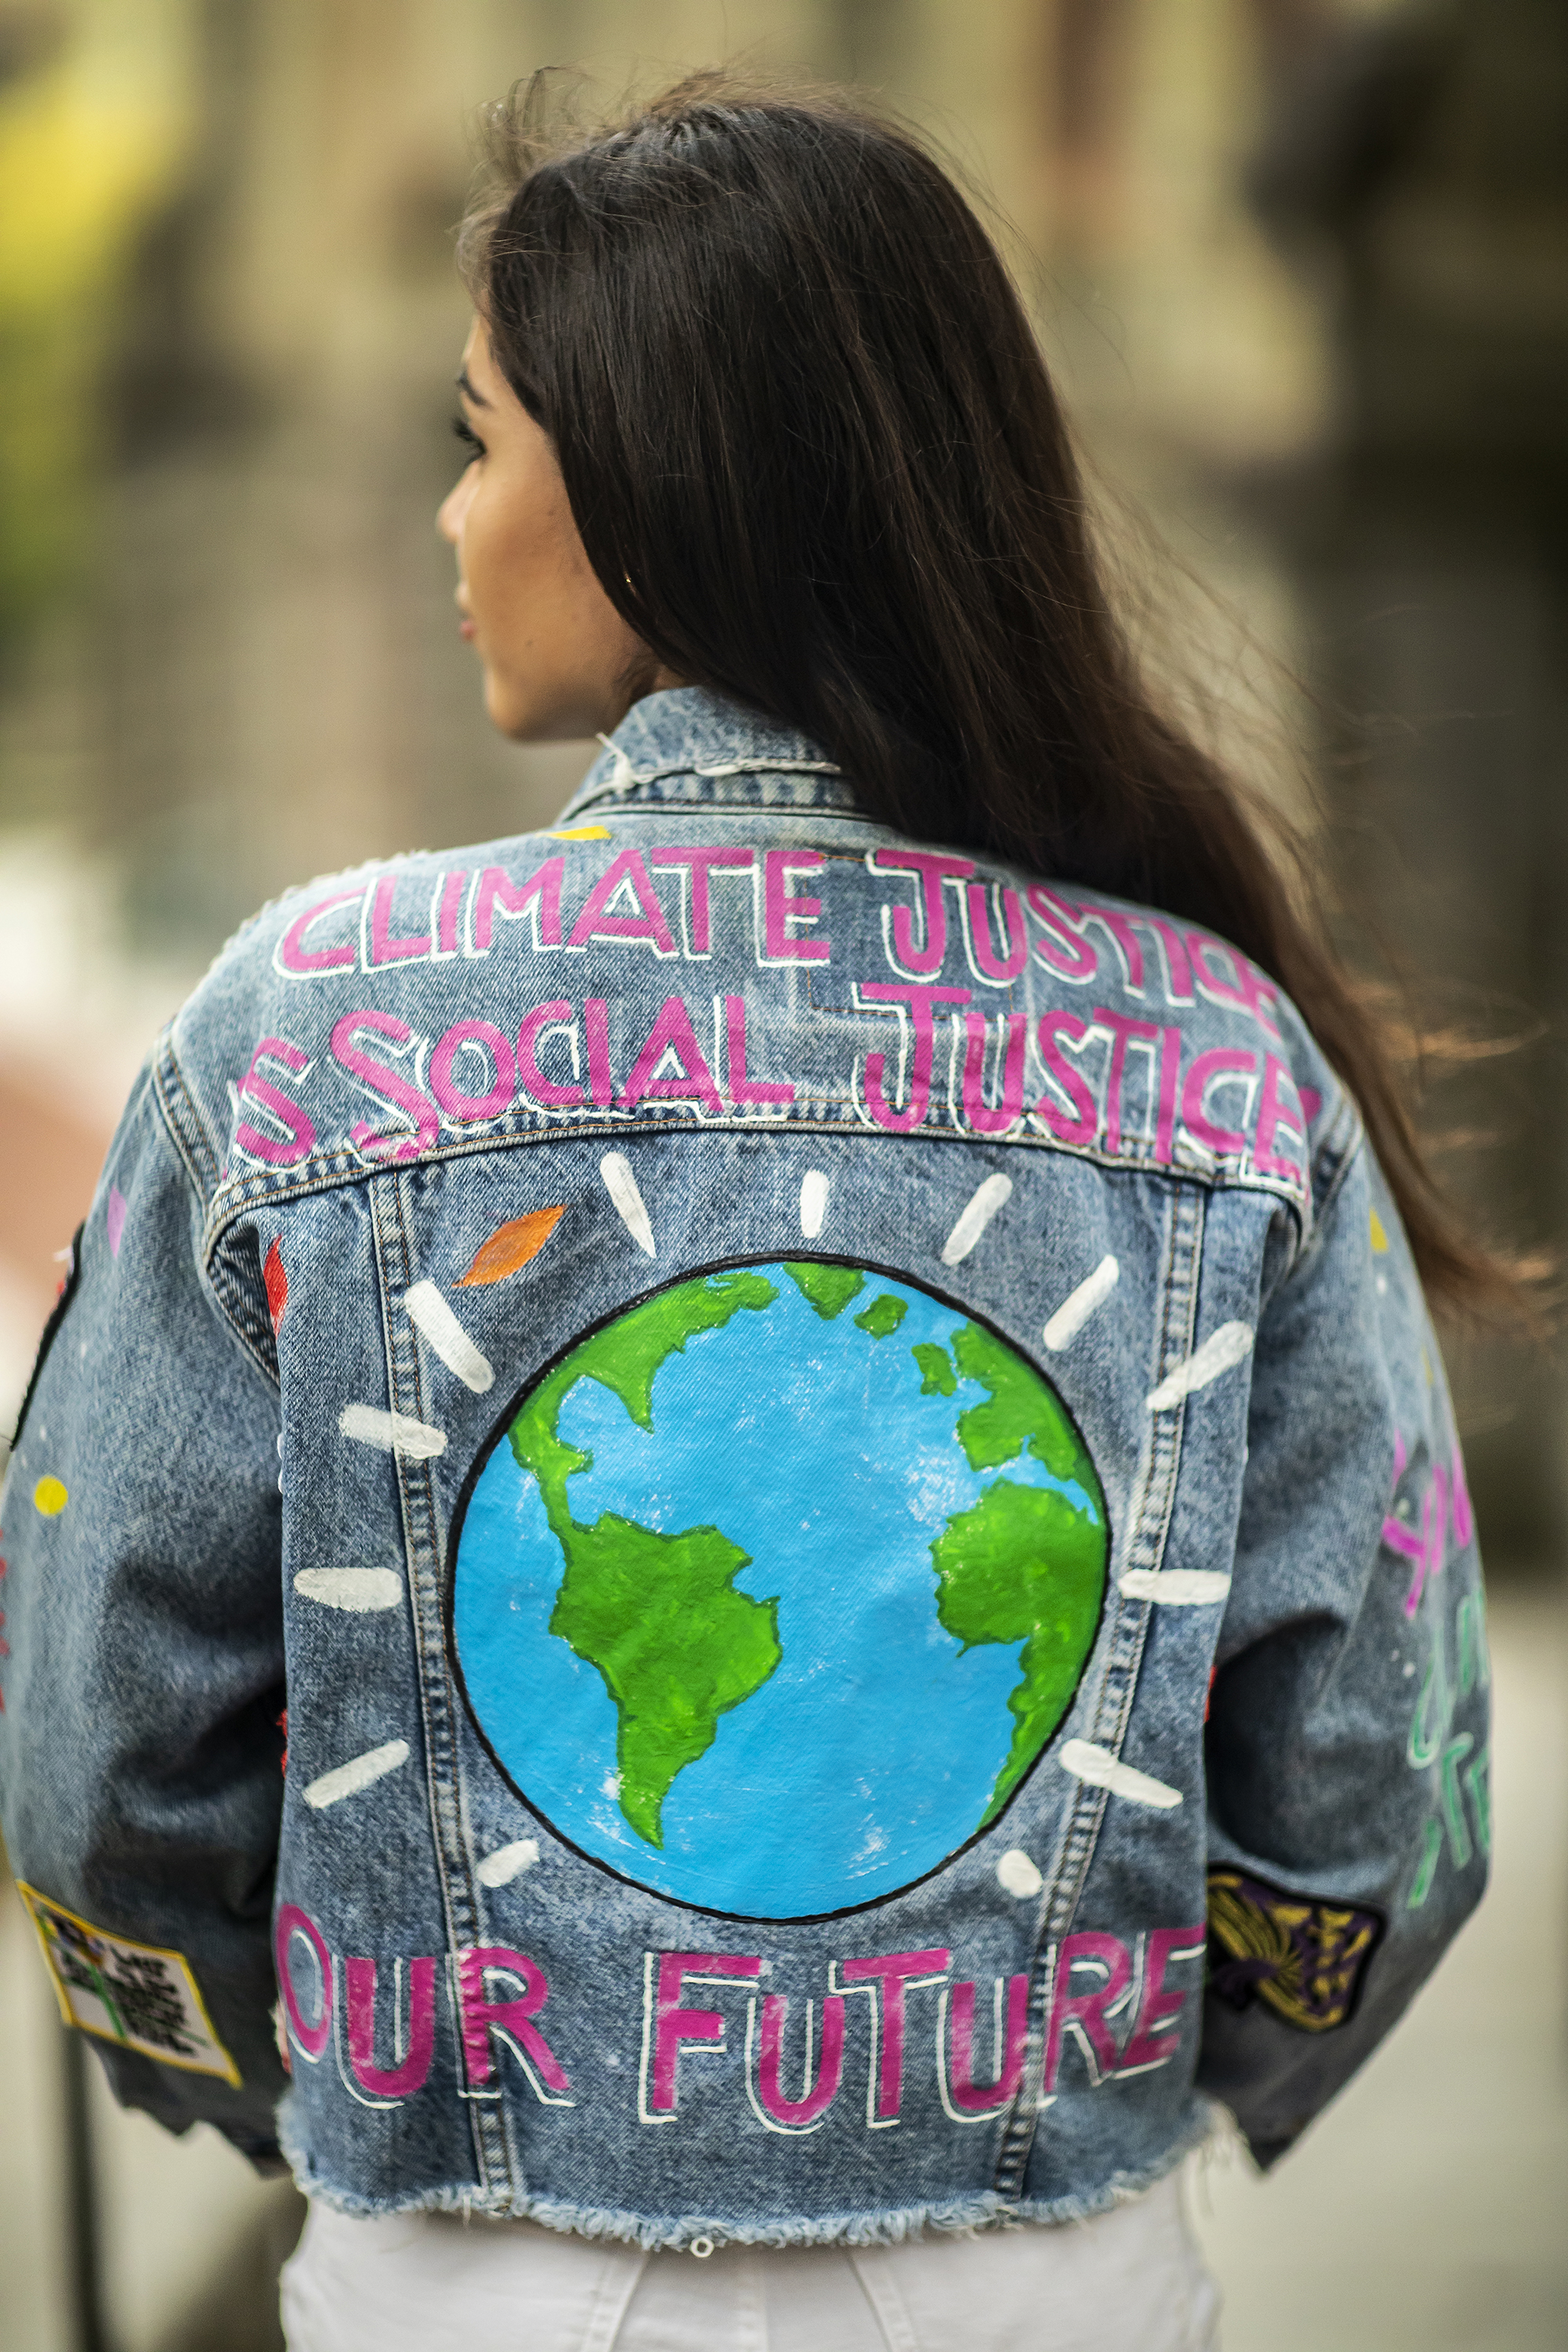 The back of a college-age woman wearing a jean jacket decorated with a blue-and-green globe and the words "Climate Justice is Social Justice" and "Our Future."